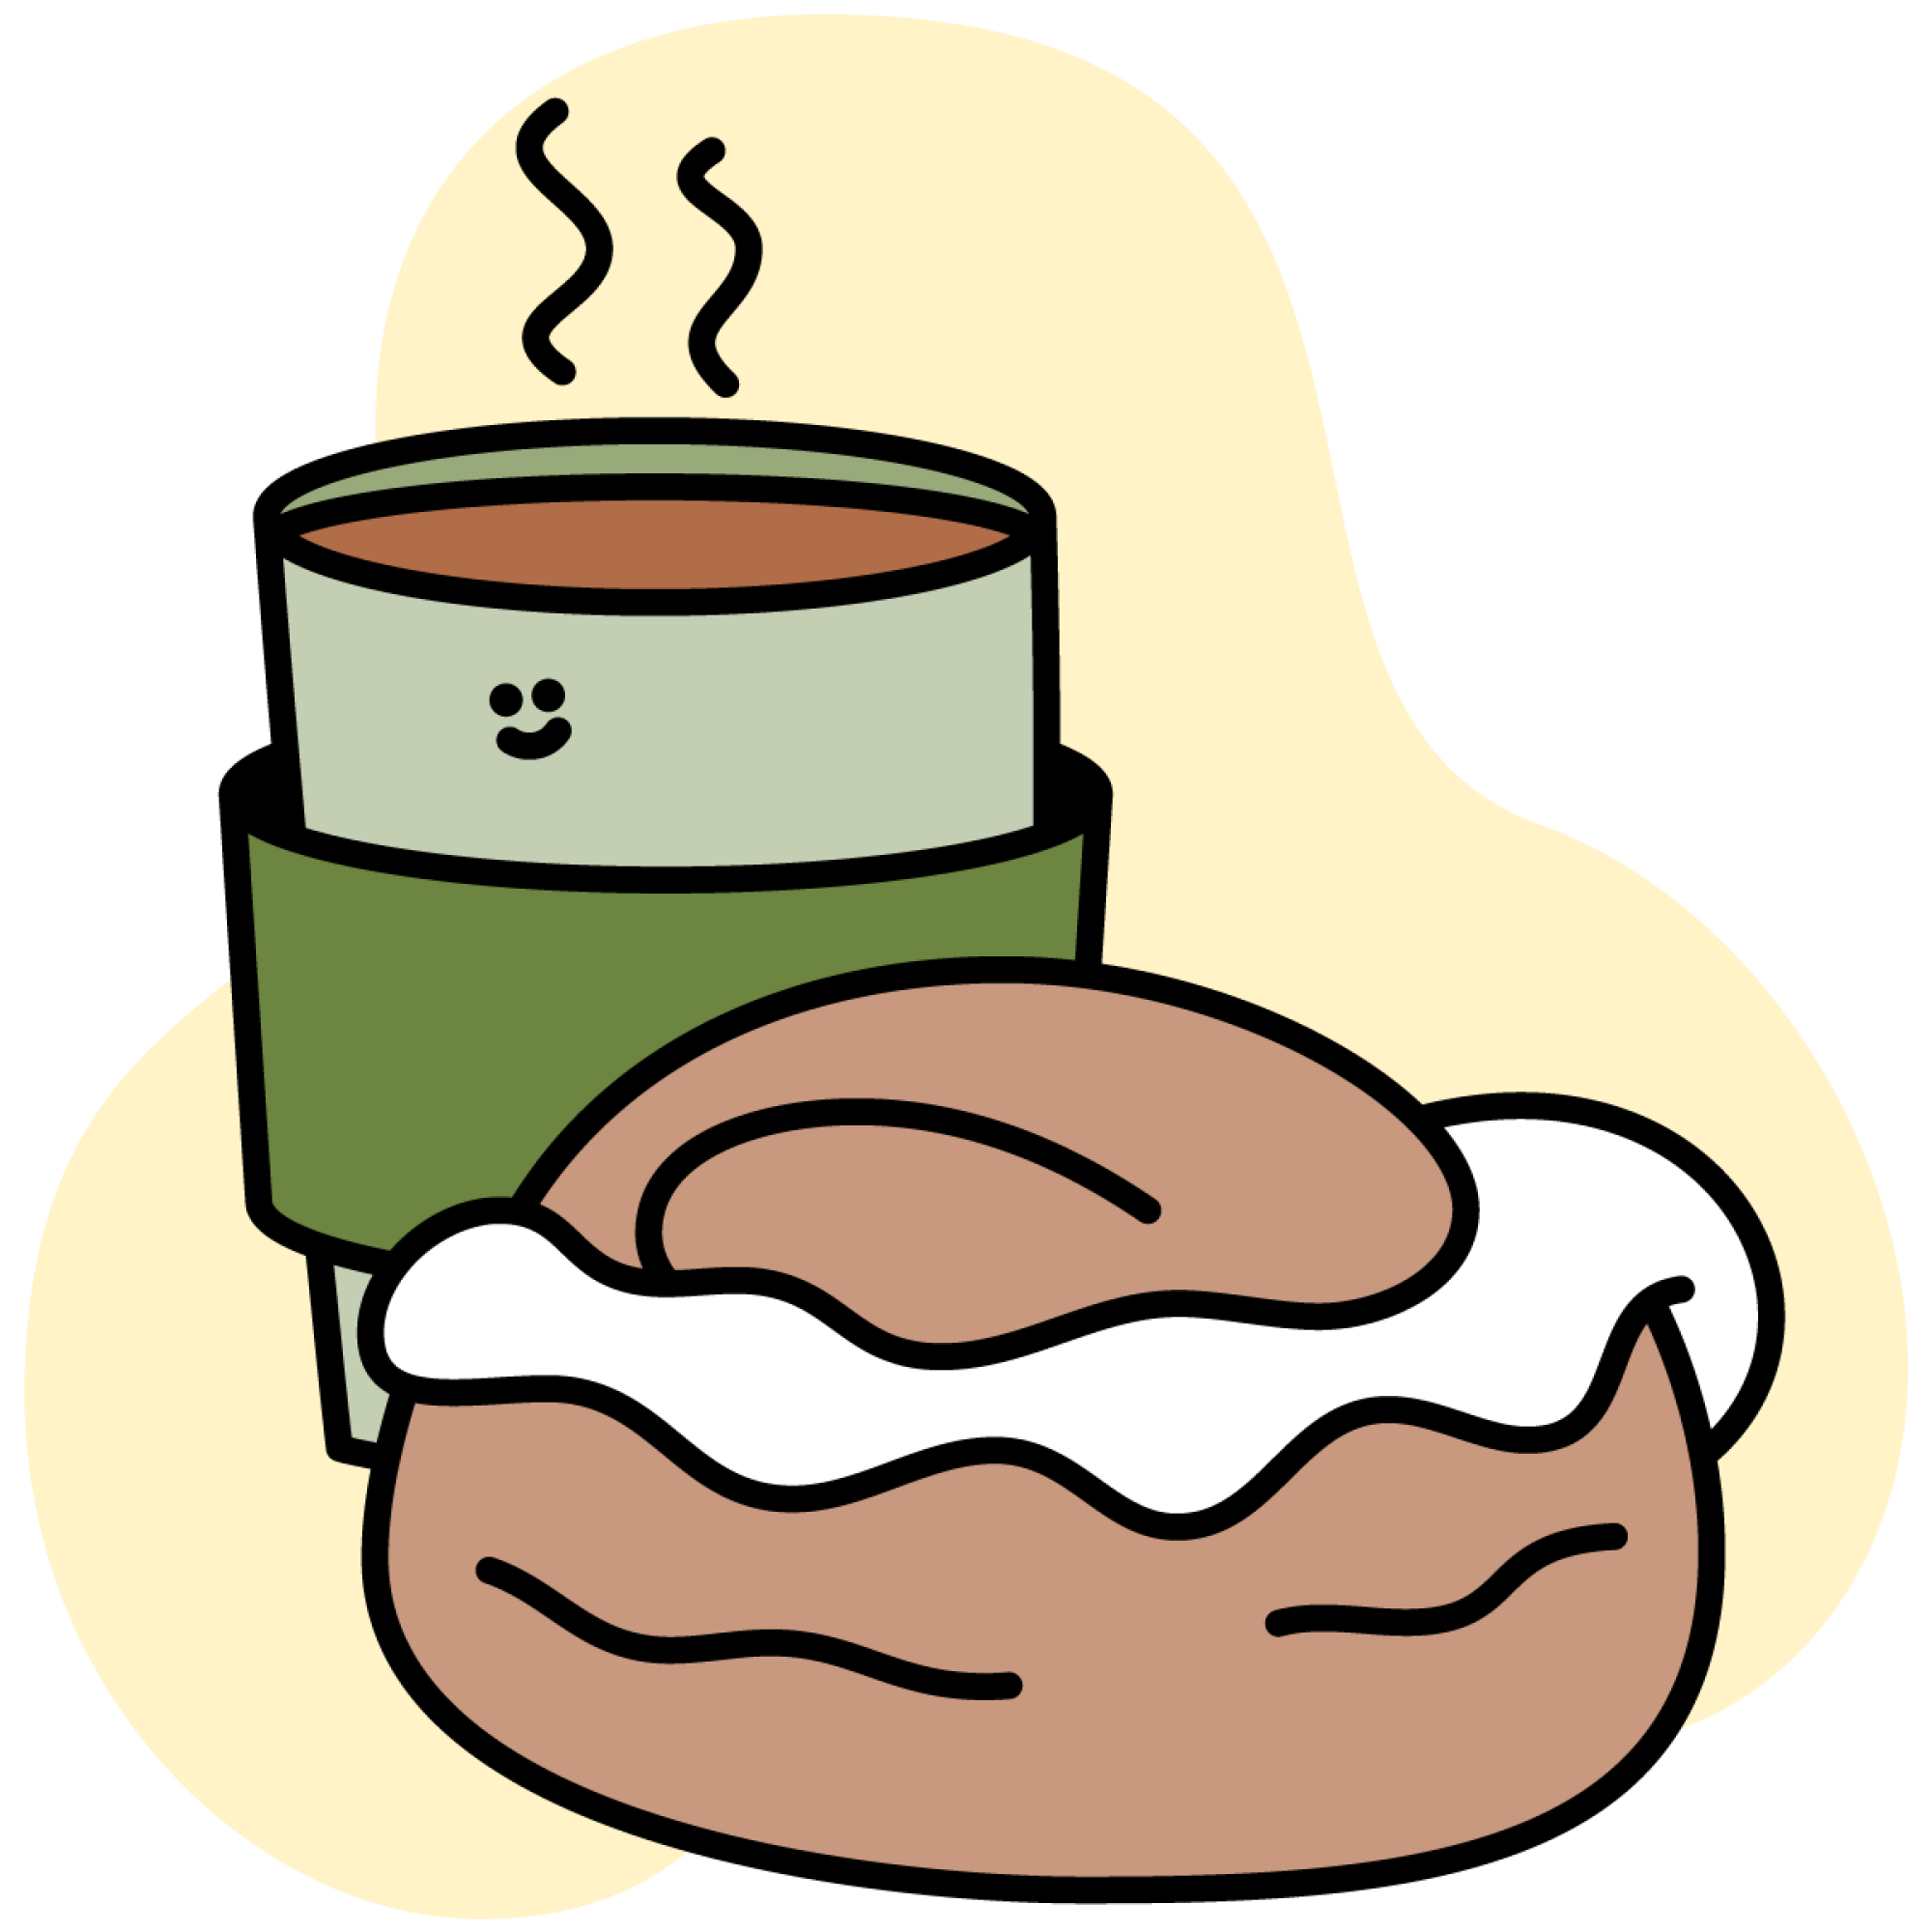 Illustration of a coffee and pastry